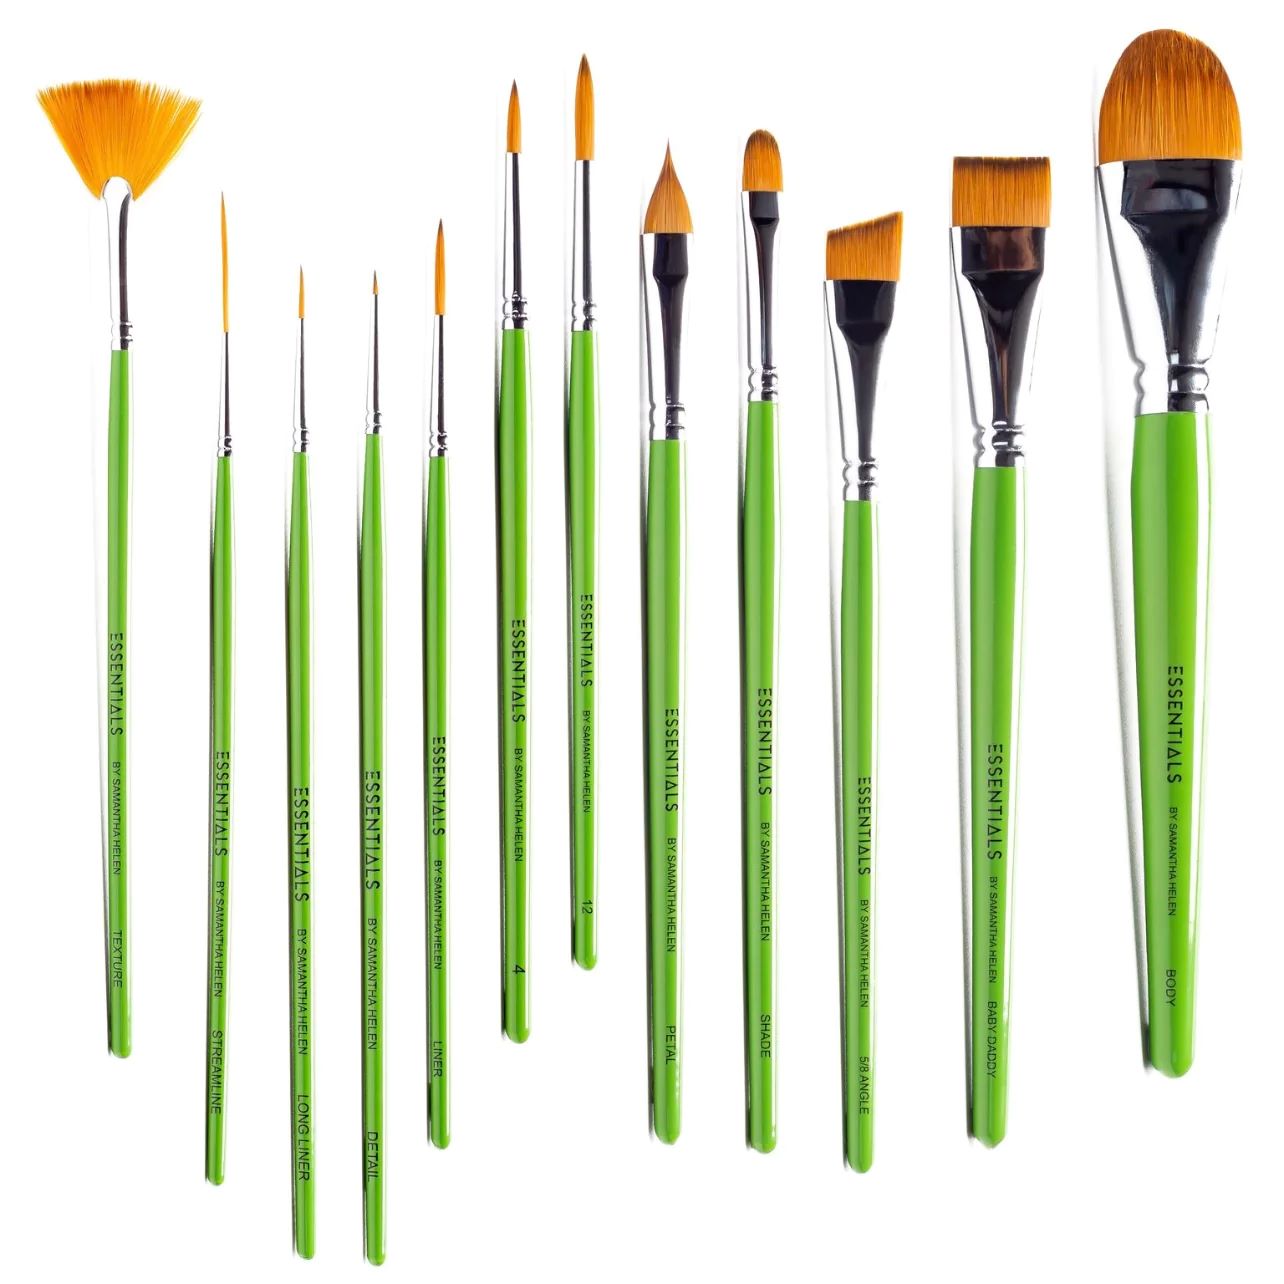  GACDR 1 inch Flat Paint Brushes for Acrylic Painting,12 Pieces  Large Synthetic Paint Brushes Bulk with Wooden Handle for Acrylic,  Watercolor, Oil, Crafts, Face Body Art